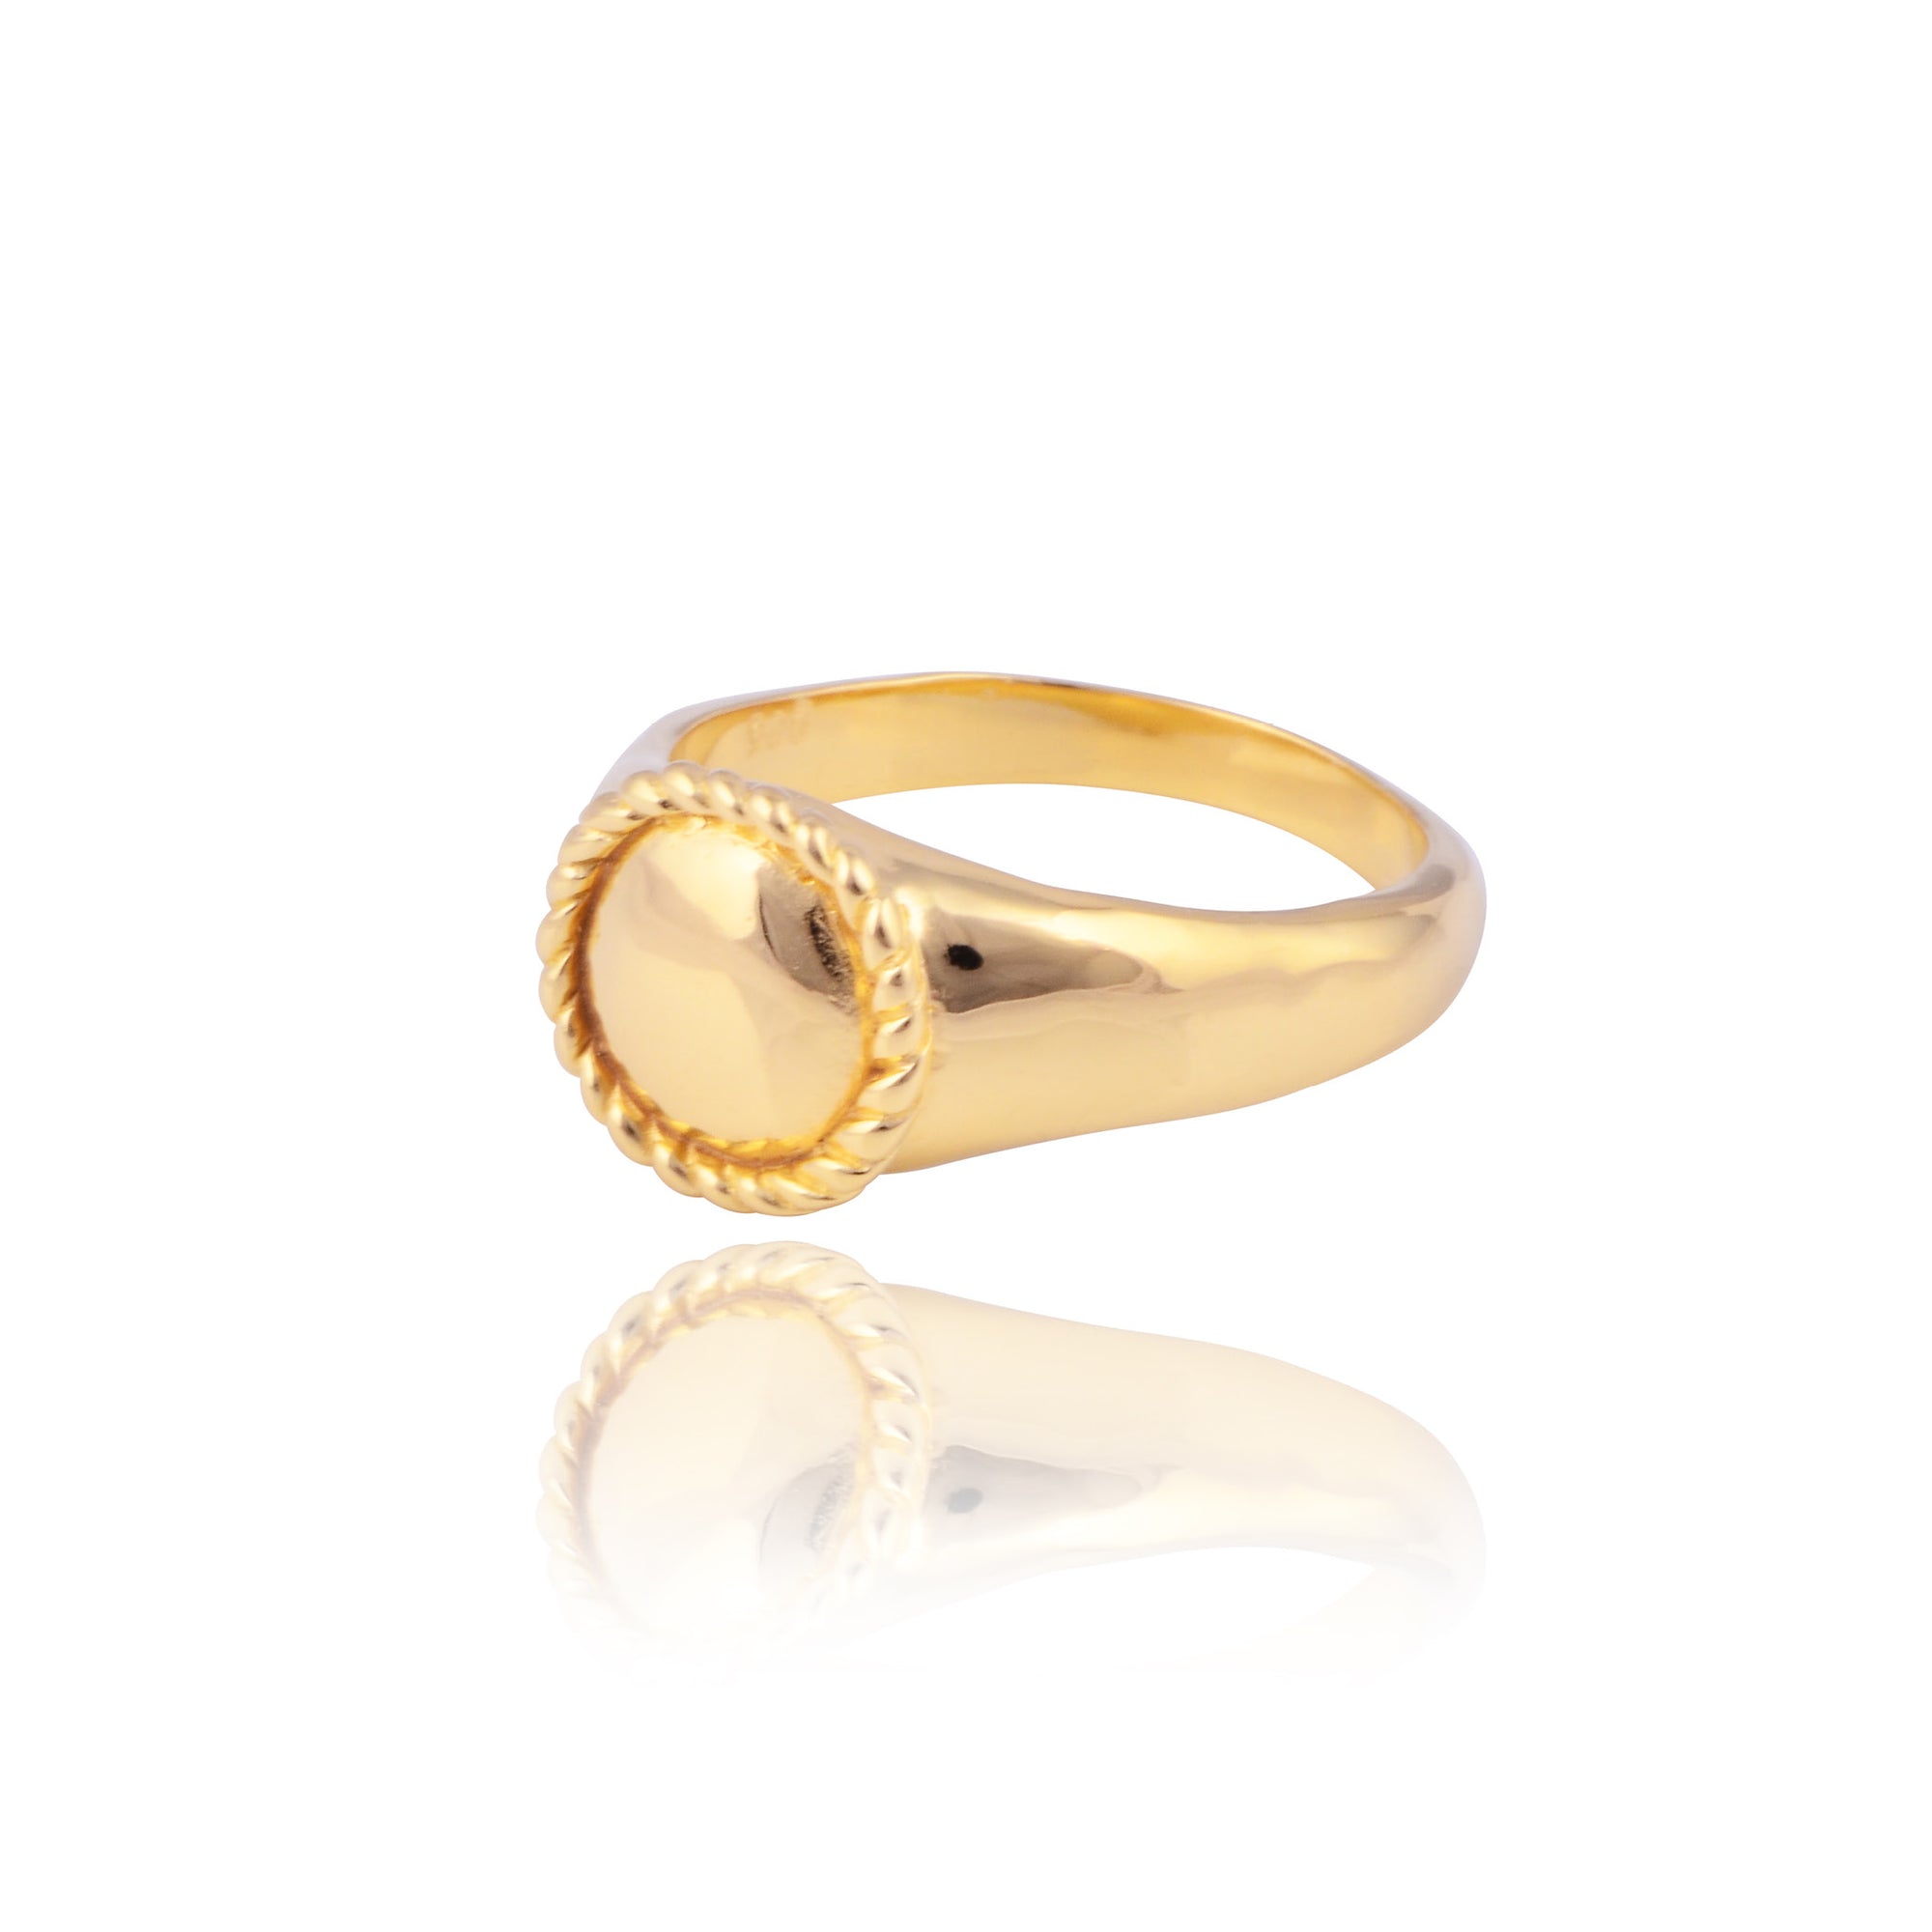 Gold Coco ring - Luna & Rose Sustainable Jewelry - Luna & Rose Jewellery